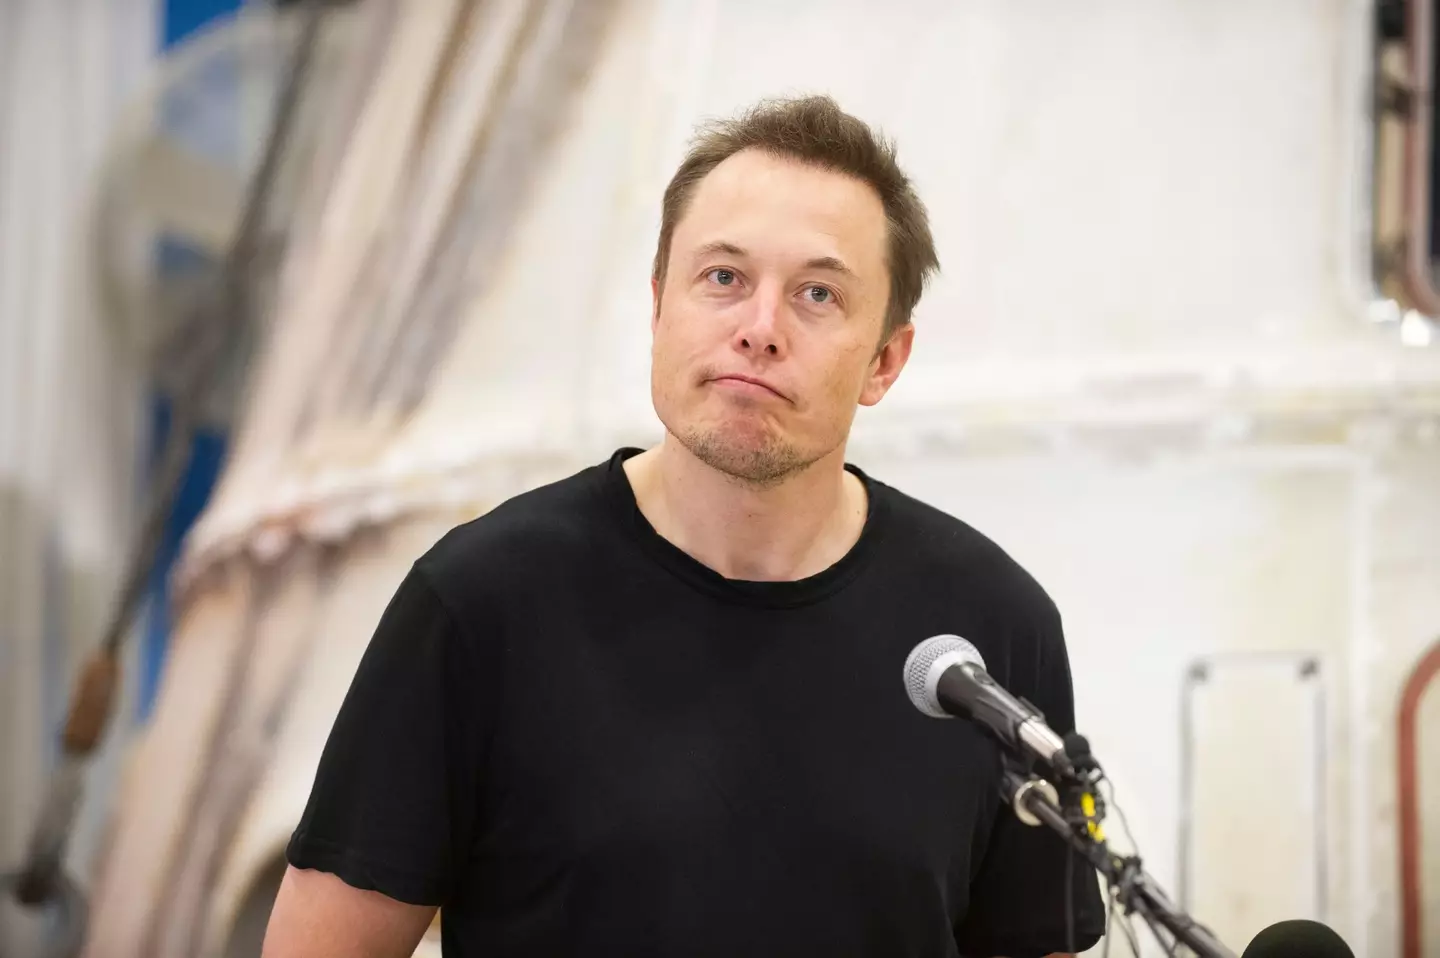 Elon Musk has had a divided response to one of his latest tweets.